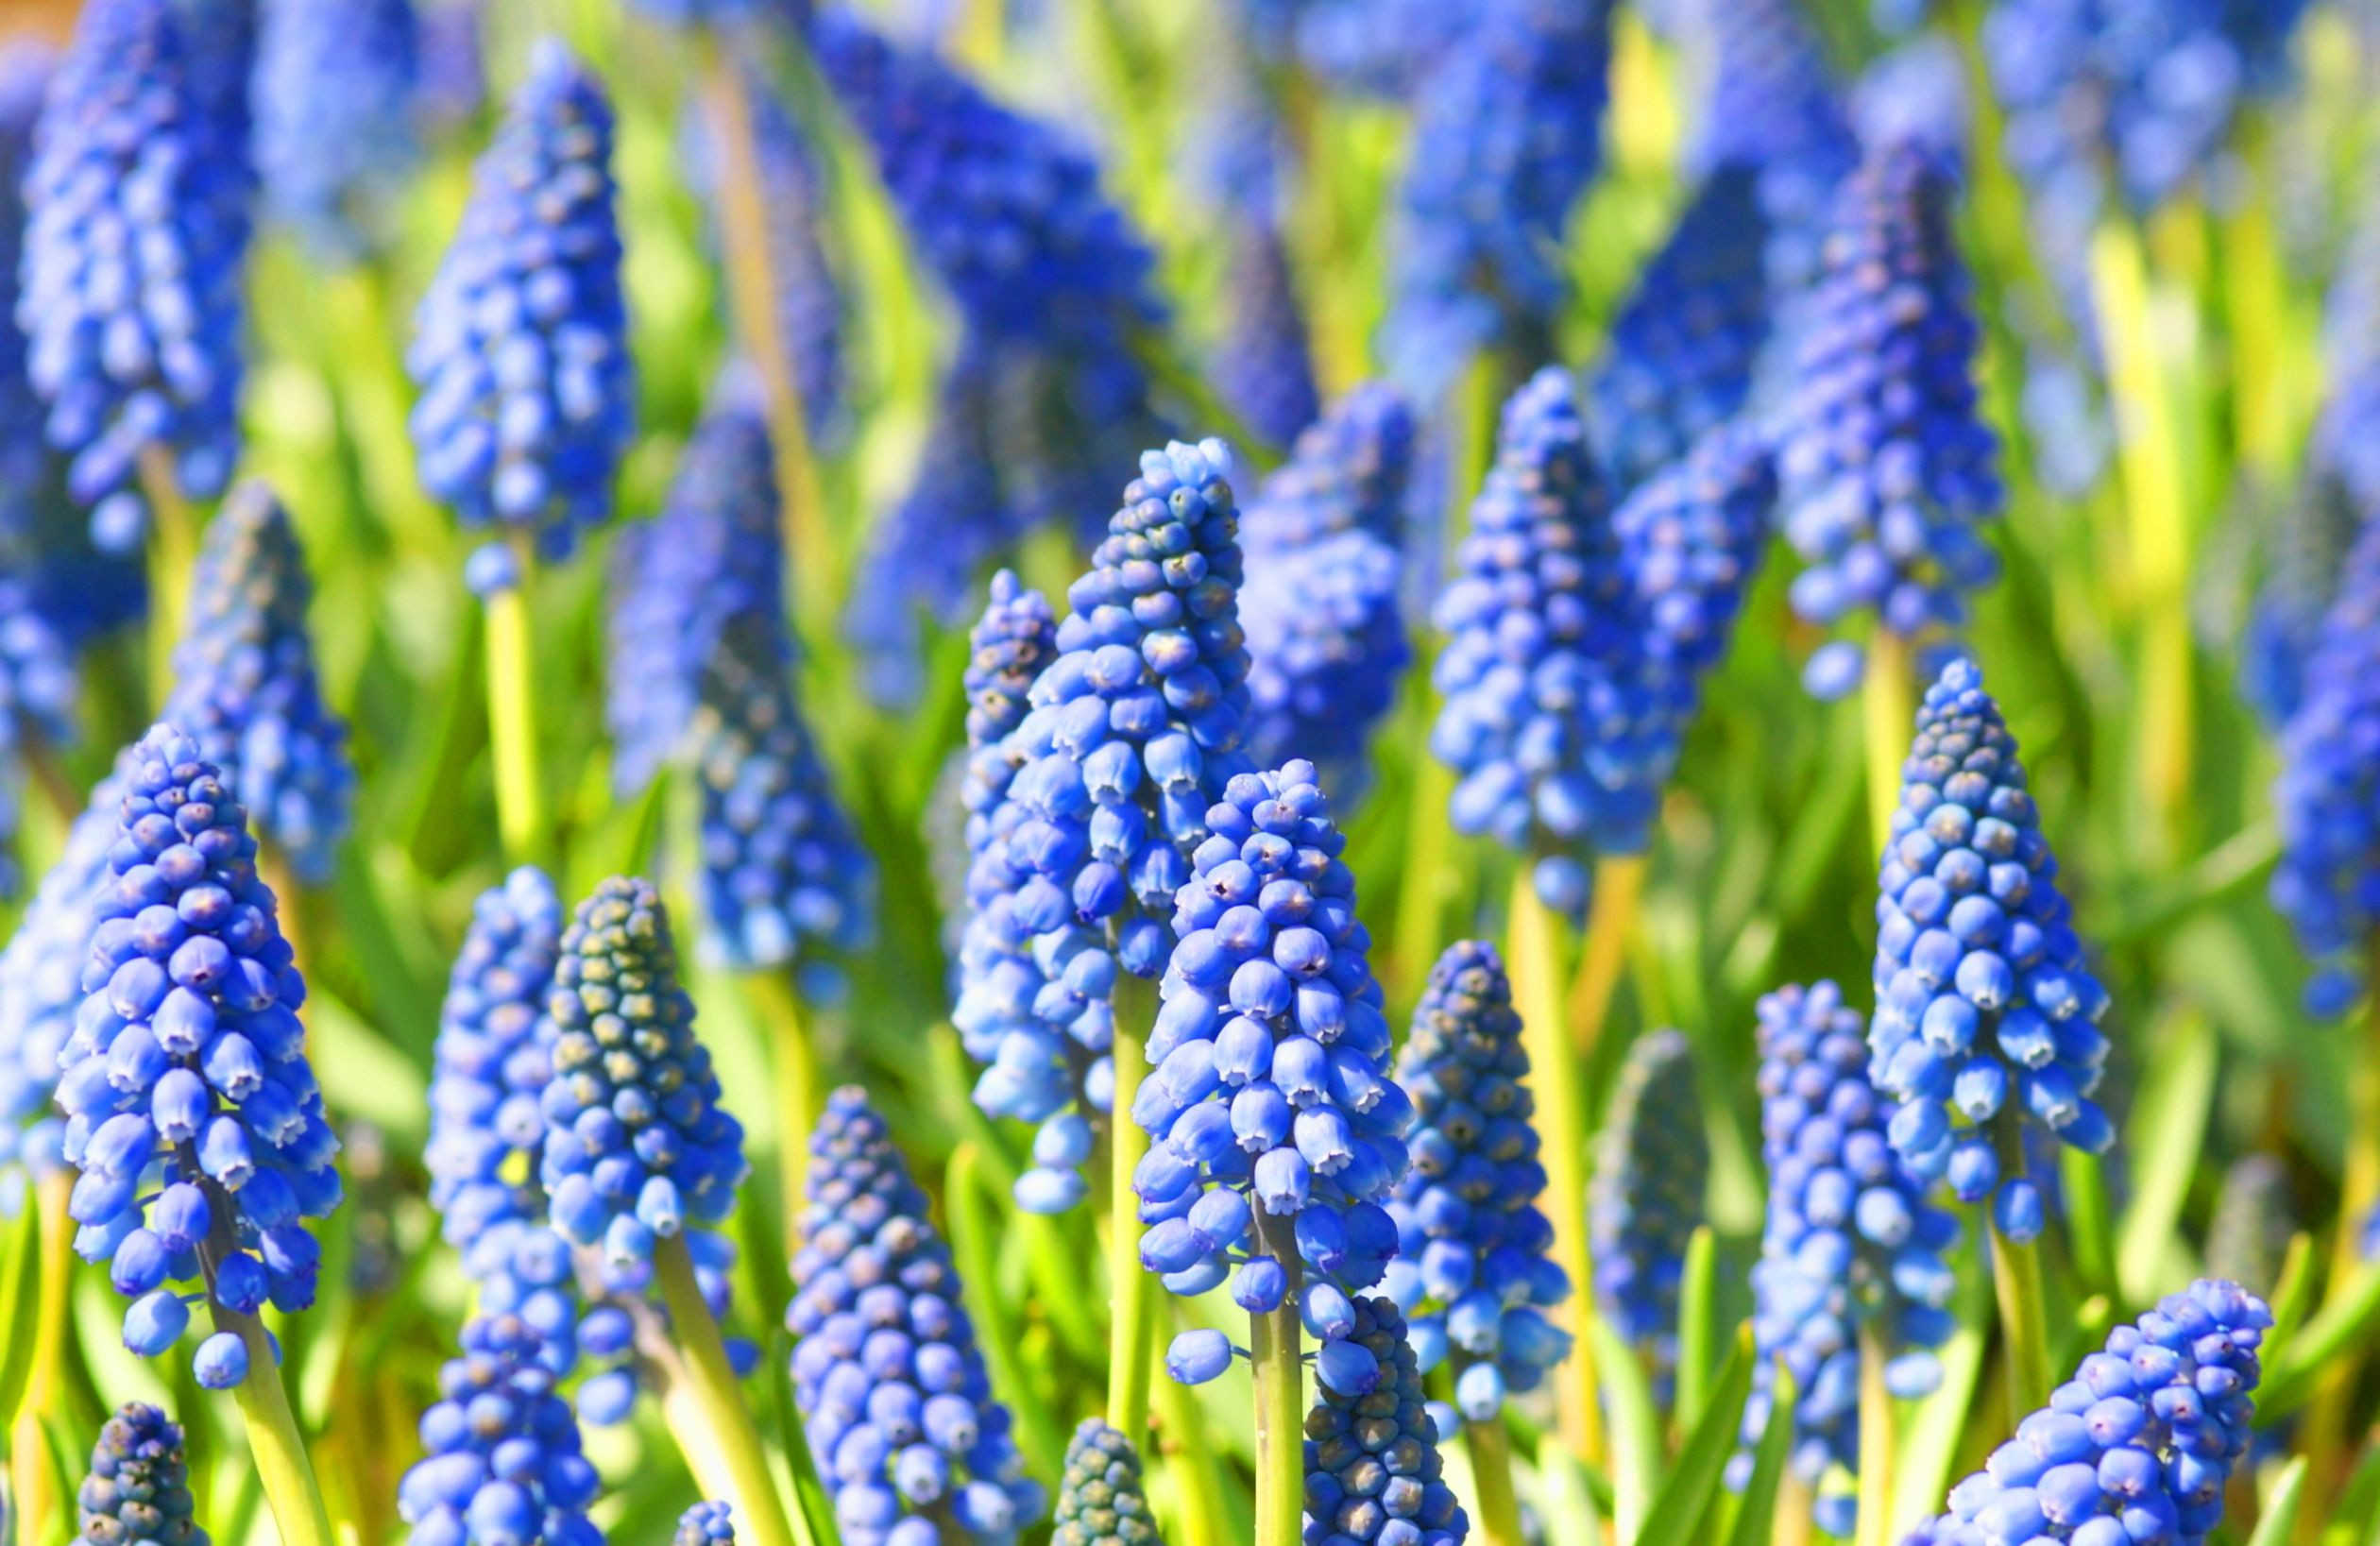 19 Perfect Bulb forcing Vases for Sale 2022 free download bulb forcing vases for sale of grape hyacinths growing muscari bulbs with grapehyacinths 58334b235f9b58d5b1628590